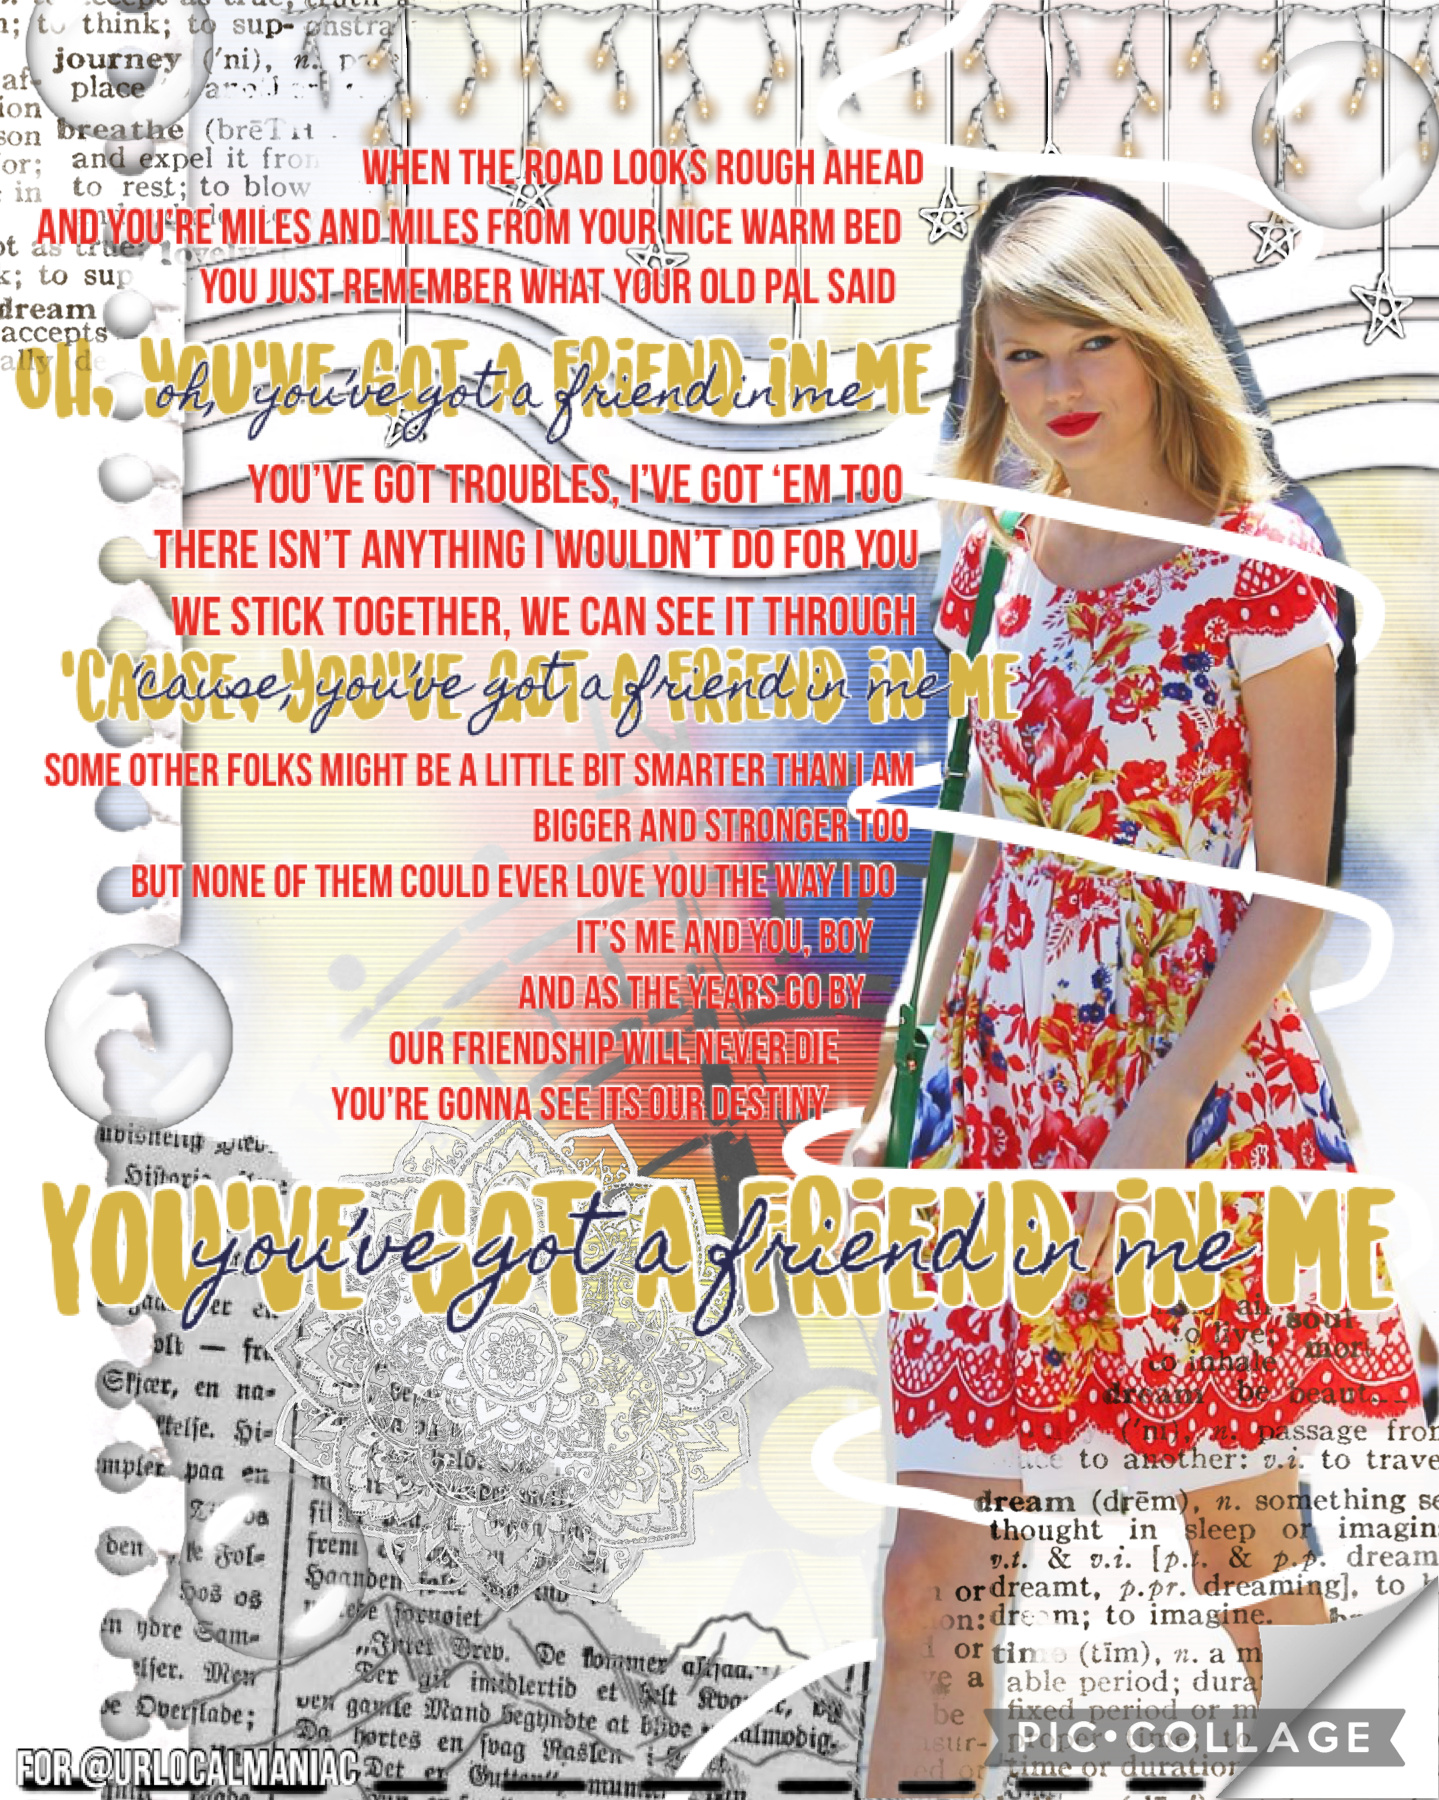 ❤️ TAP ❤️
💛 Taylor Swift collage!! 💛
💙 Lyrics from the song “You’ve Got A Friend In Me” 💙
❤️ For @urlocalmaniac’s birthday ❤️
💛 check comments but it might take a while to type it all out lol 💛
💙 ilysmmm💙